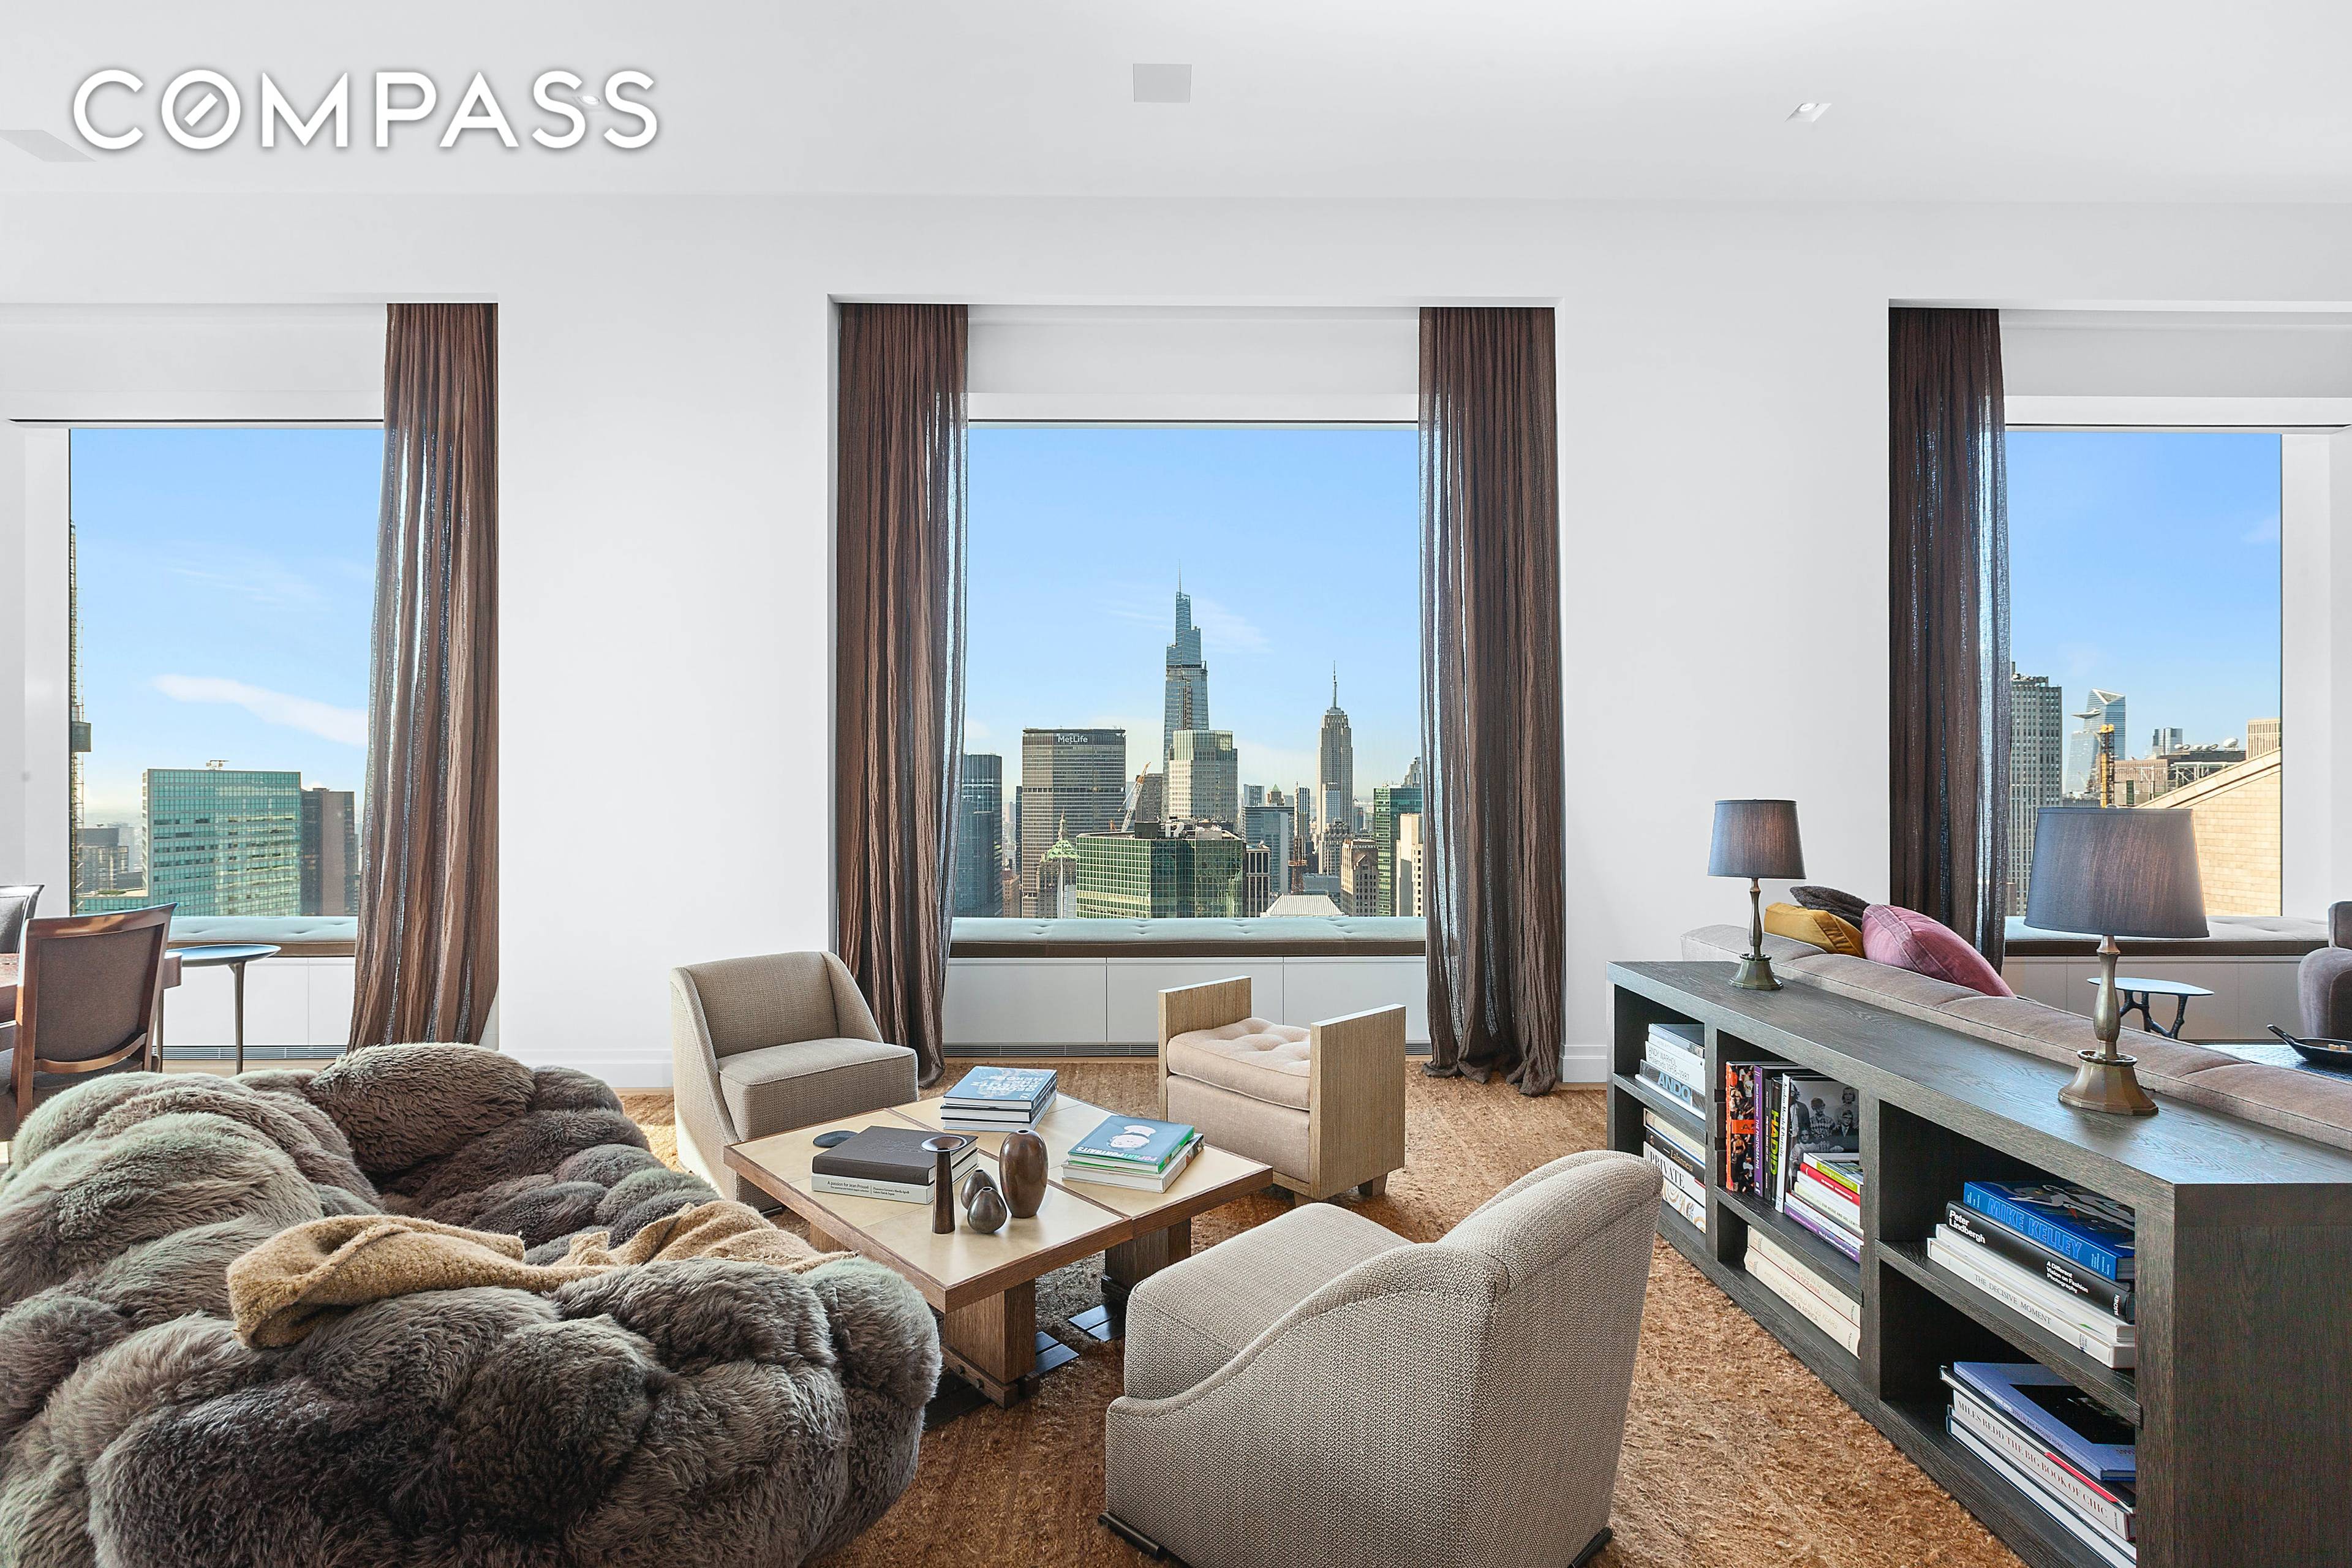 No expense has been spared in the design of apartment 52B at 432 Park Avenue.